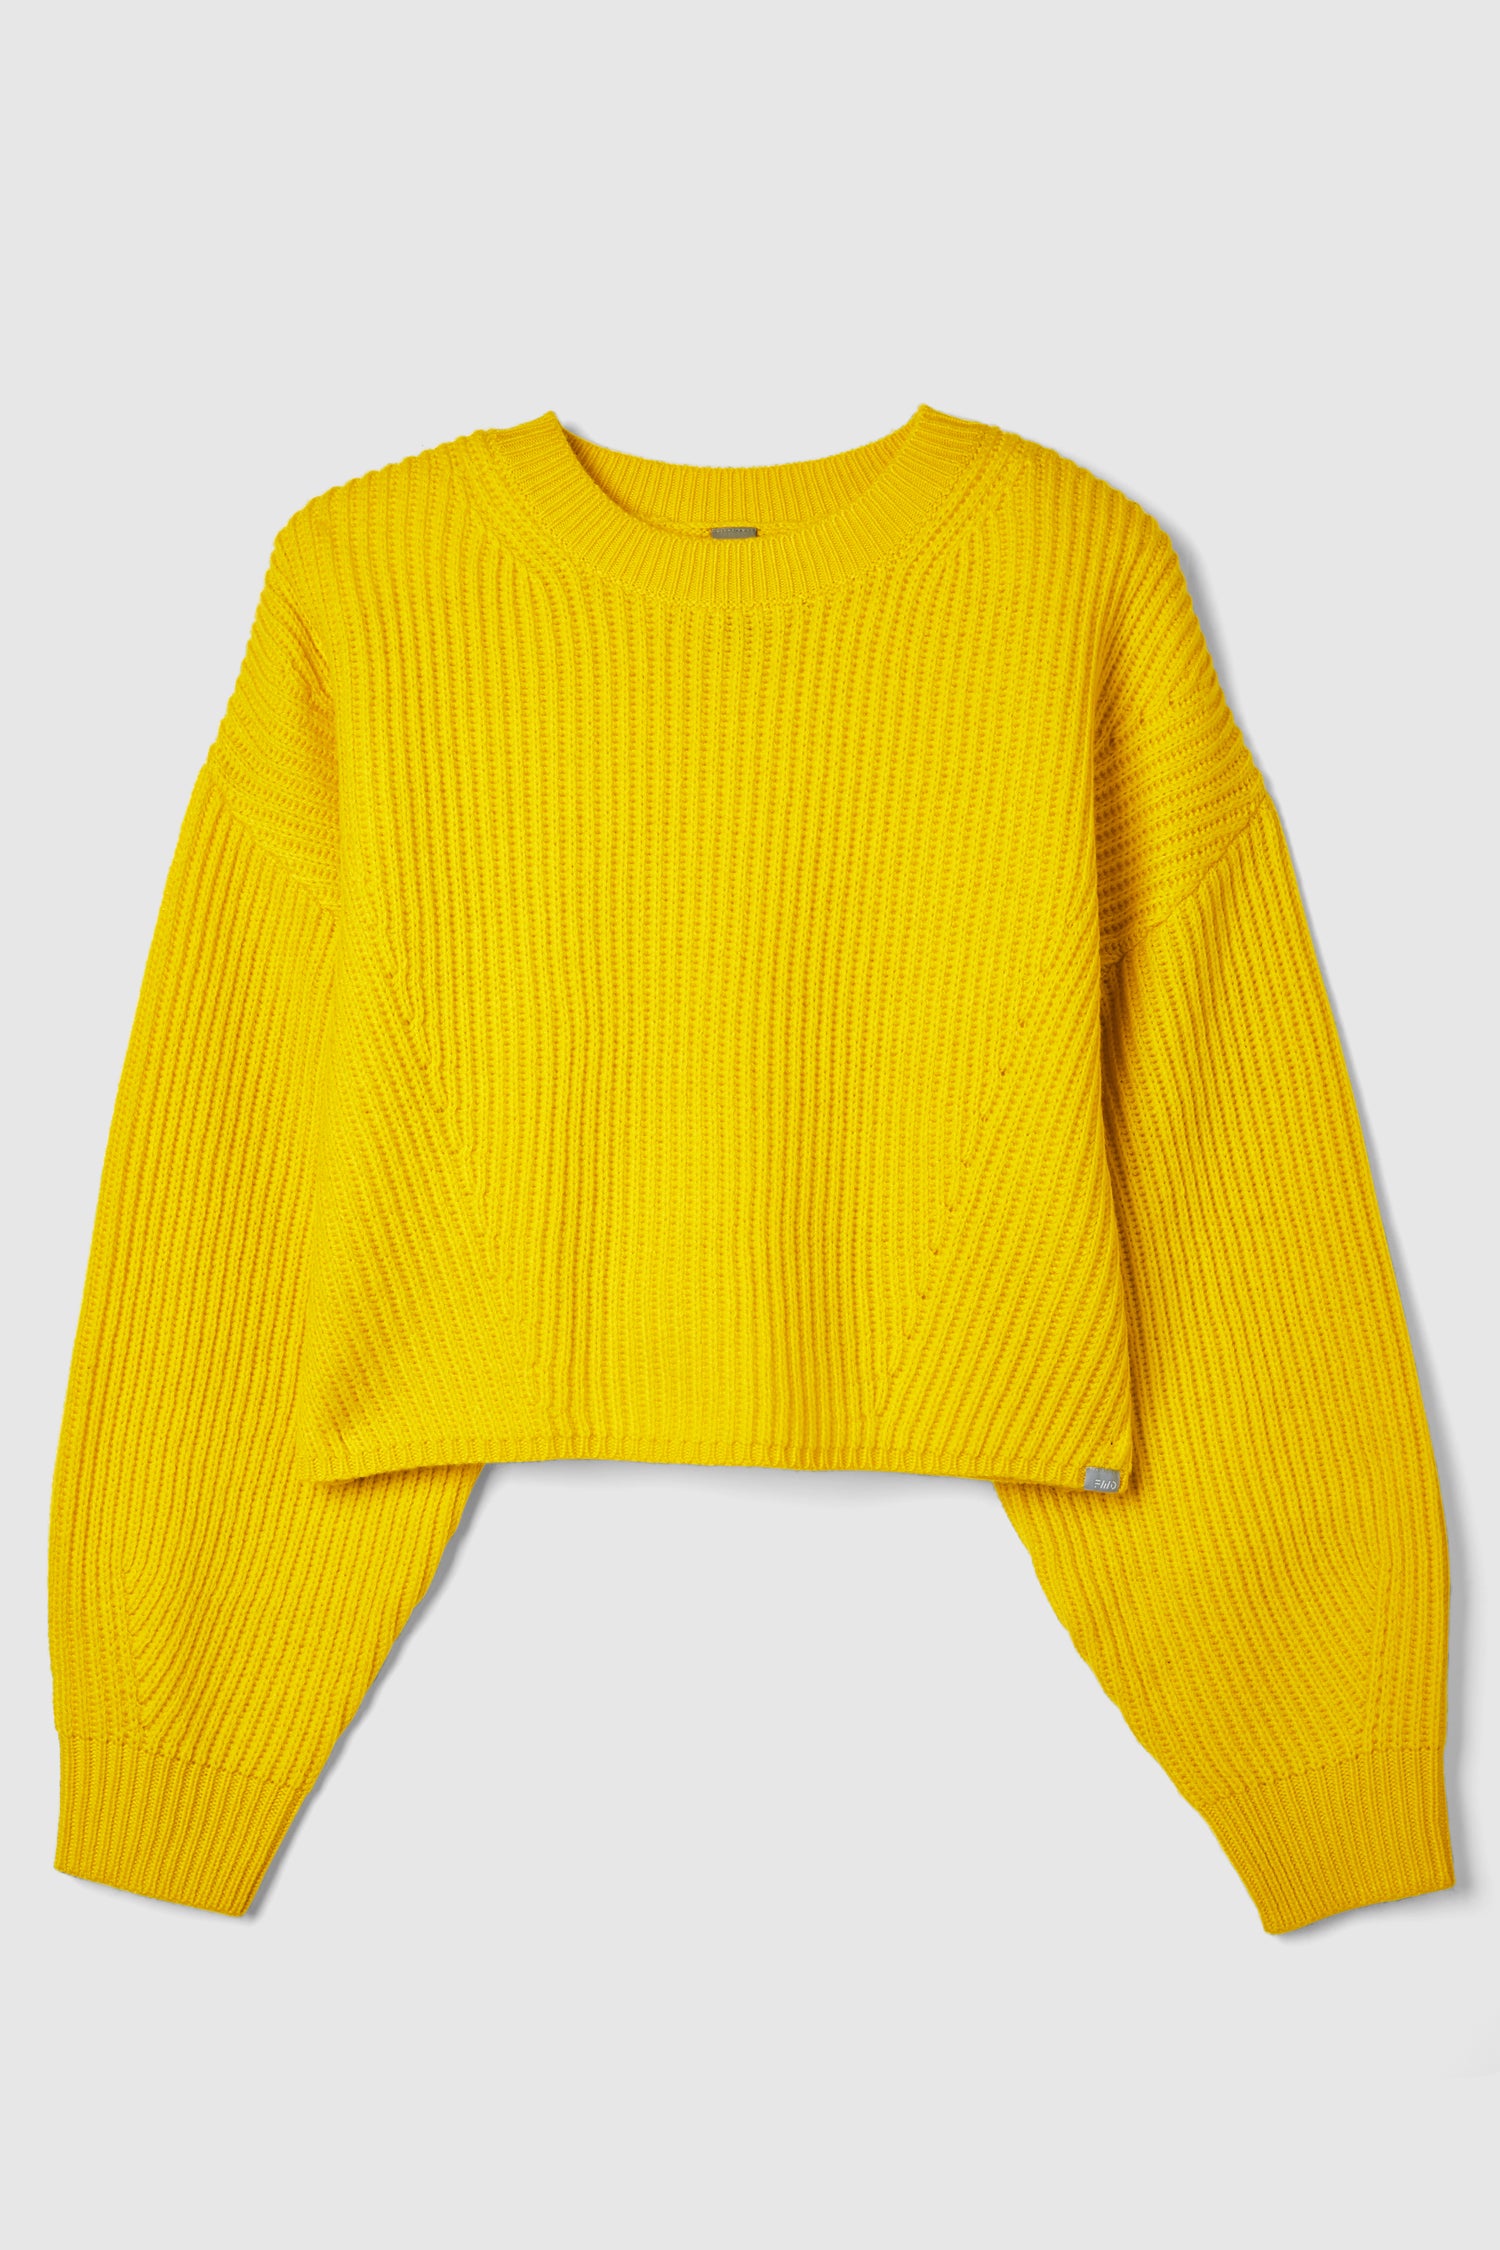 Cropped Sweaters, Crop Top Sweaters